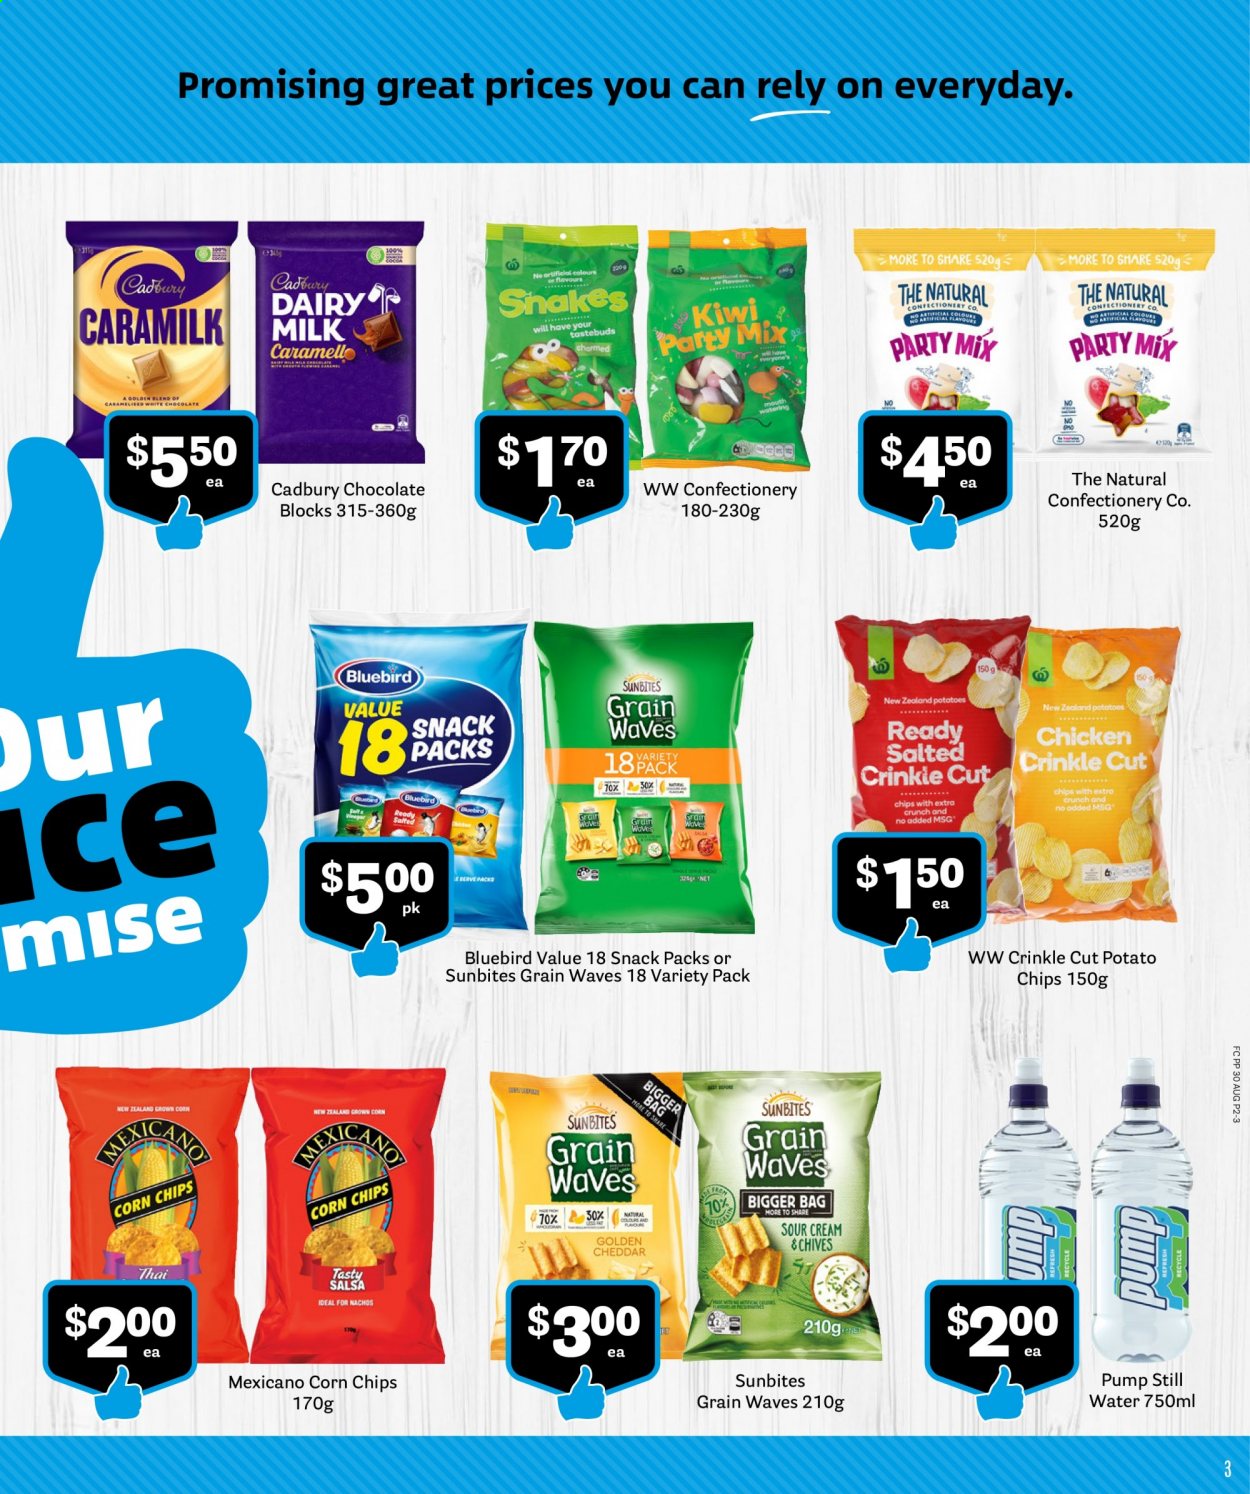 thumbnail - Fresh Choice mailer - 01.09.2021 - 30.09.2021 - Sales products - chives, kiwi, cheese, shake, sour cream, white chocolate, chocolate, snack, Cadbury, Dairy Milk, potato chips, chips, corn chips, Mexicano, Bluebird, Sunbites, salsa, mineral water, bottled water. Page 3.